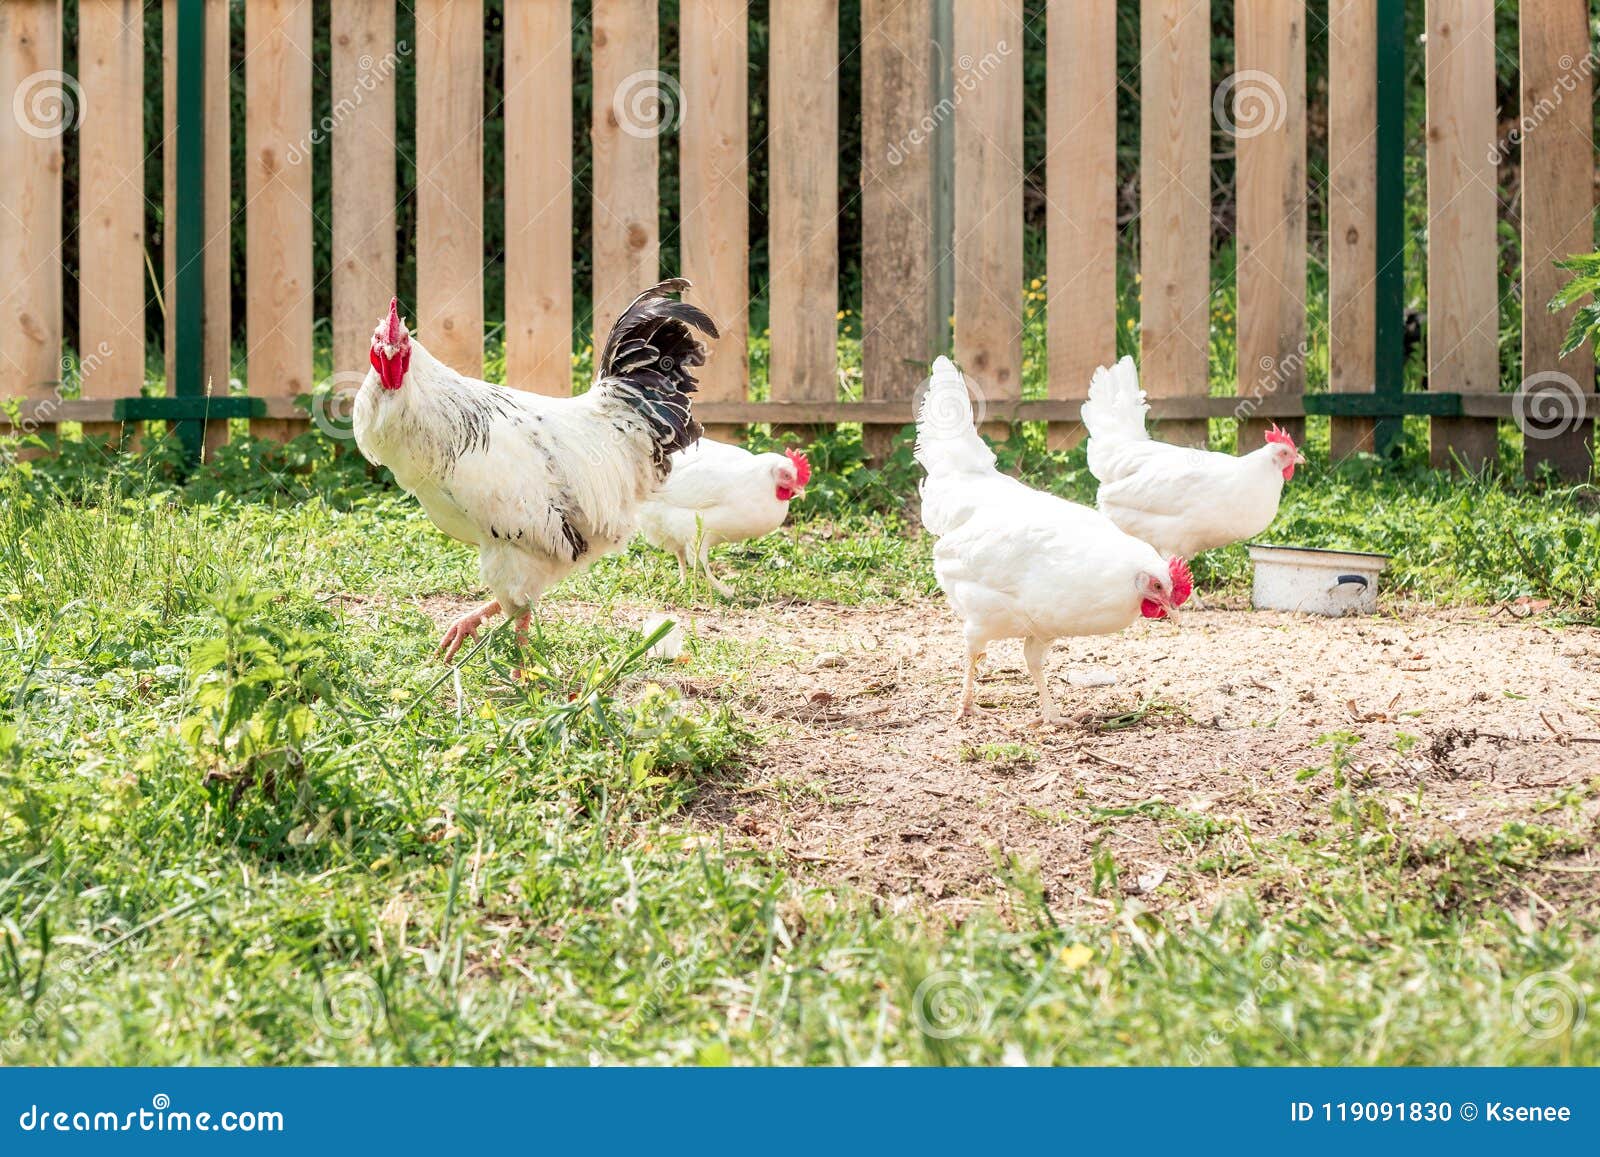 High-sex White Chicken Walking in a Yard Stock Photo pic